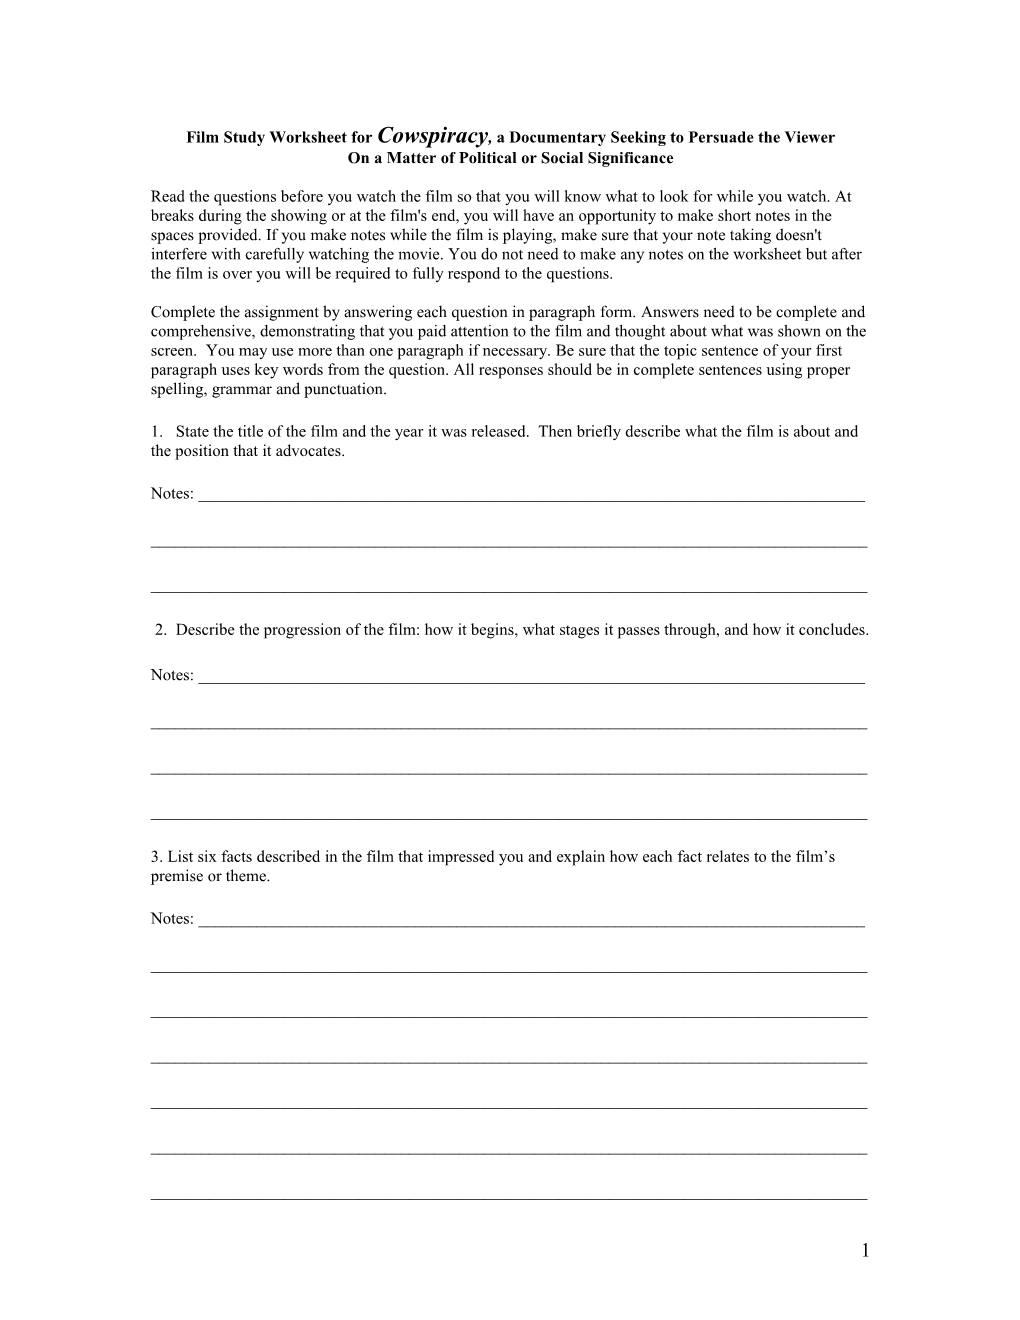 Film Study Worksheet for Cowspiracy, a Documentary Seeking to Persuade the Viewer